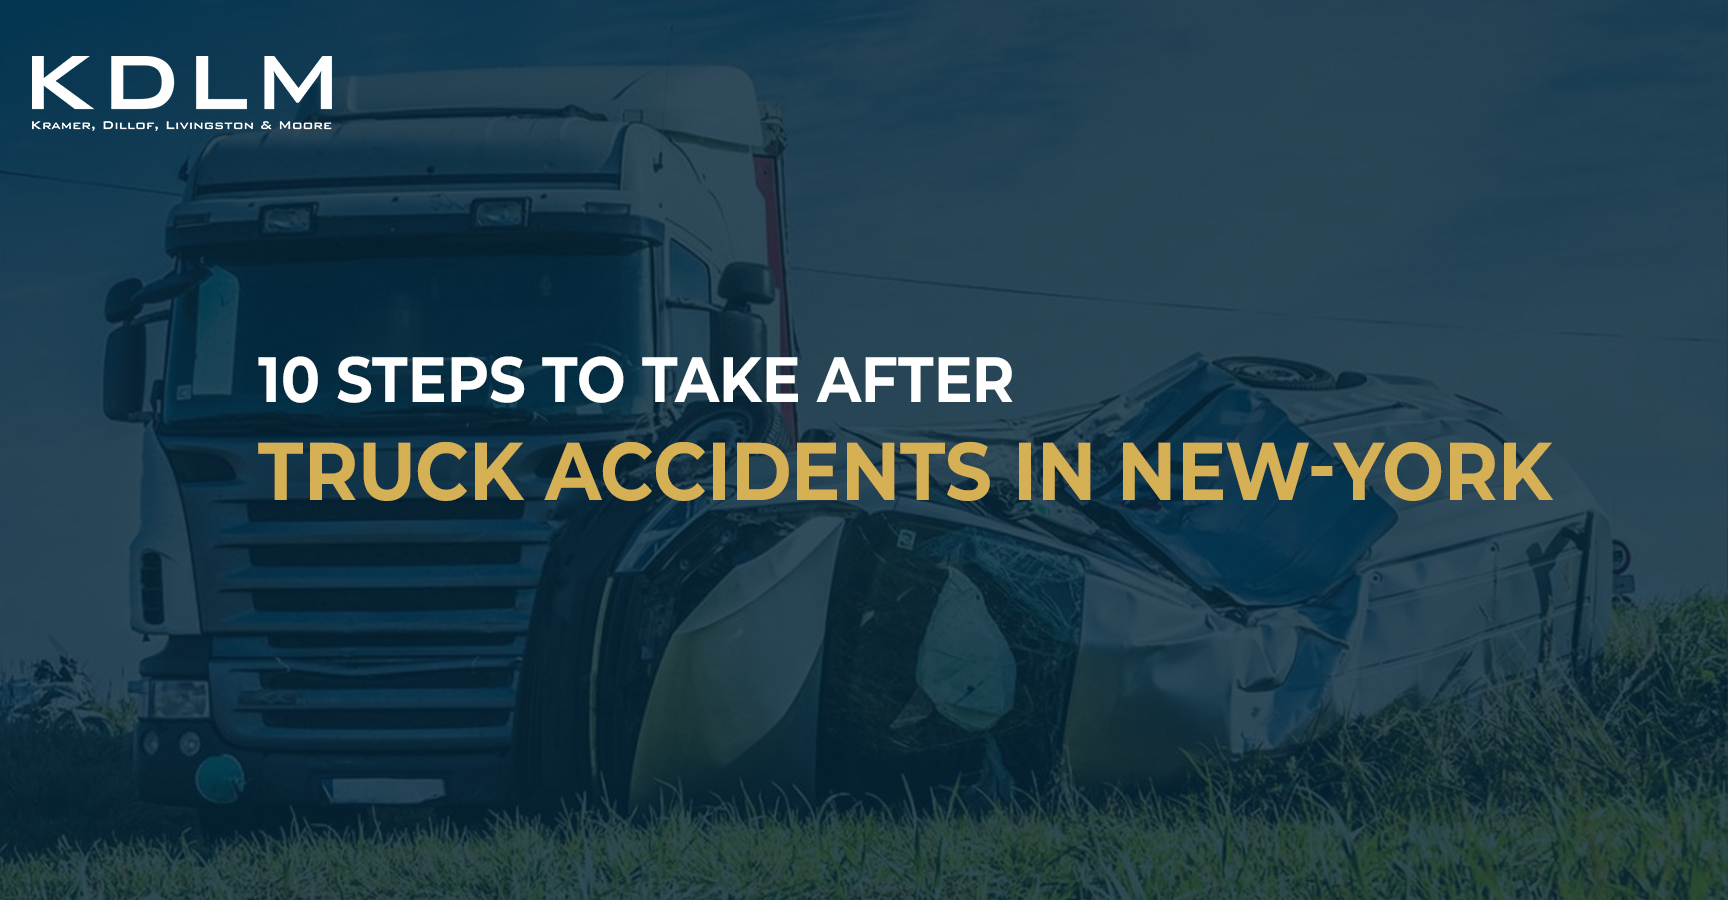 10 Steps to Take After Truck Accidents in New York